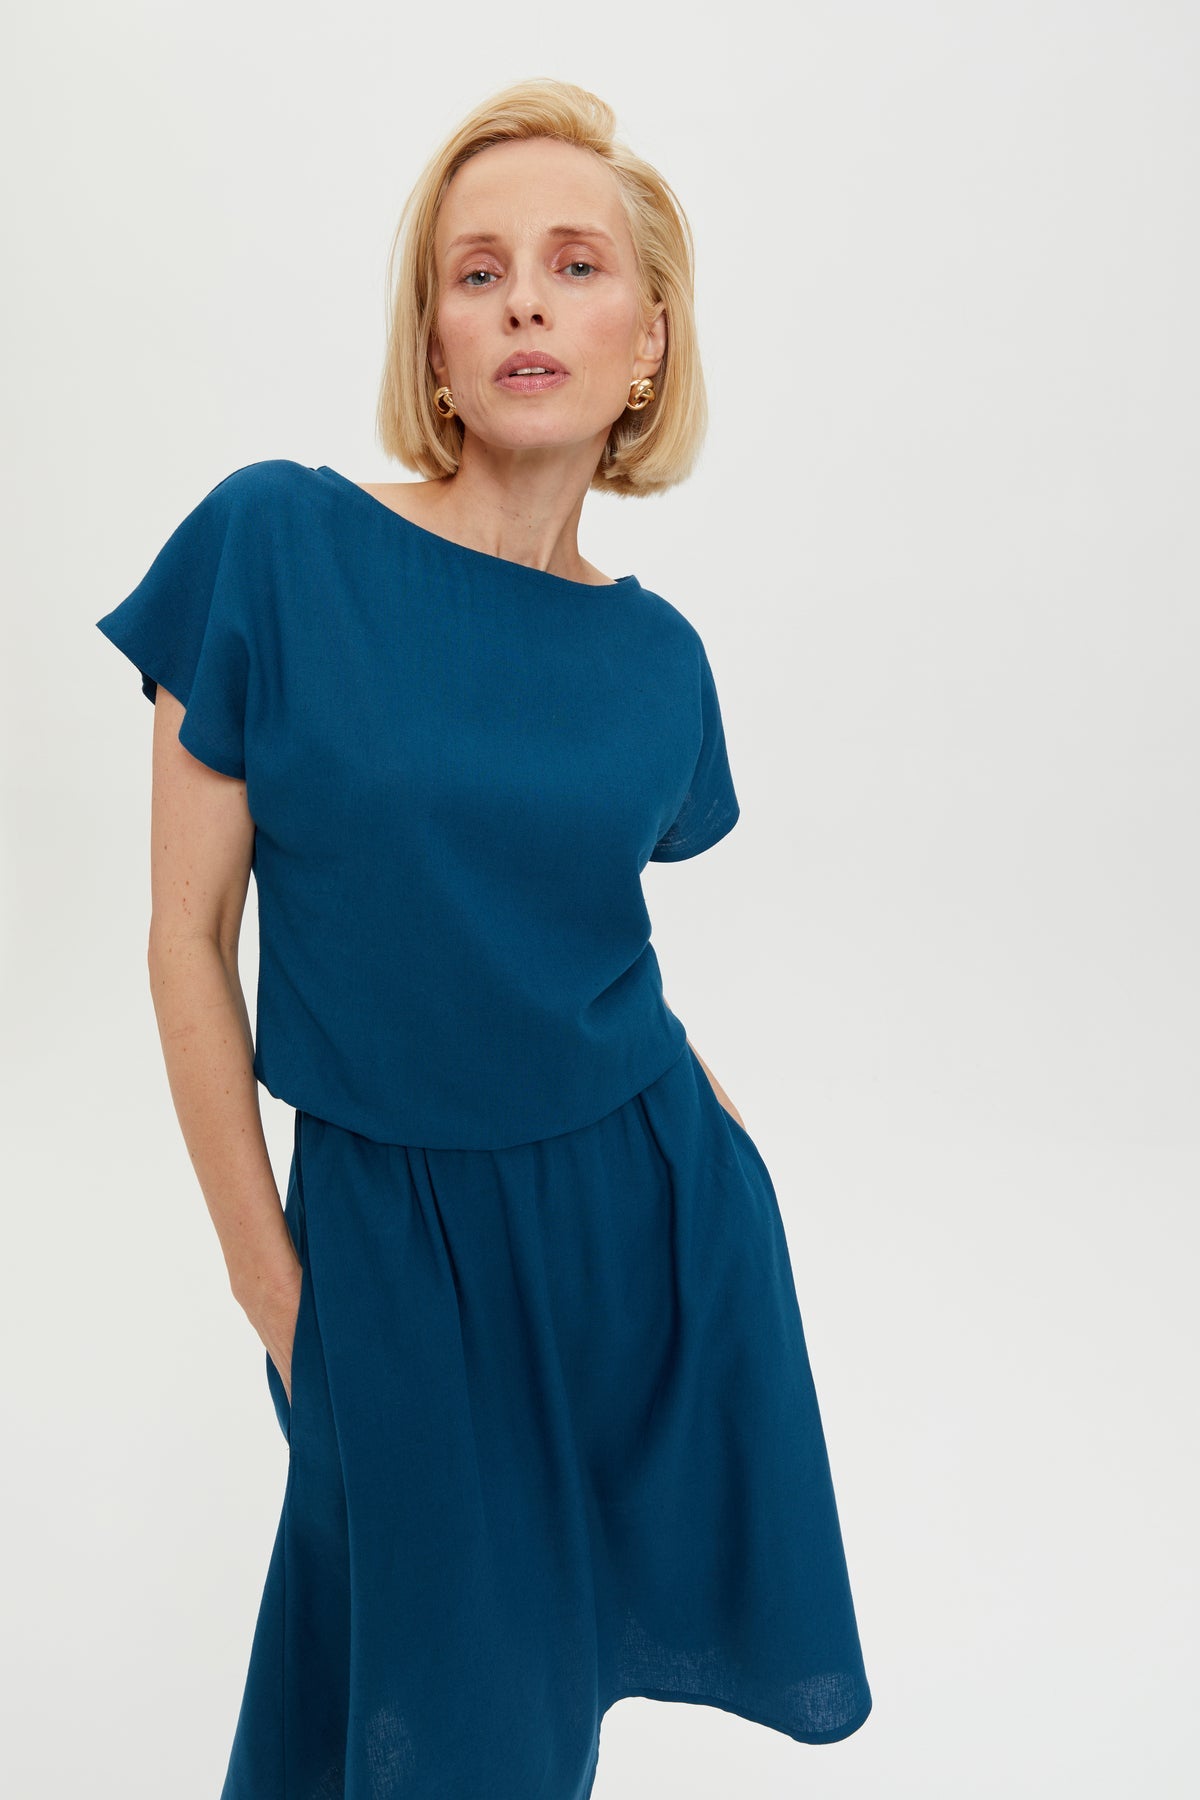 Nane | Linen dress with short sleeves in petrol blue by Ayani